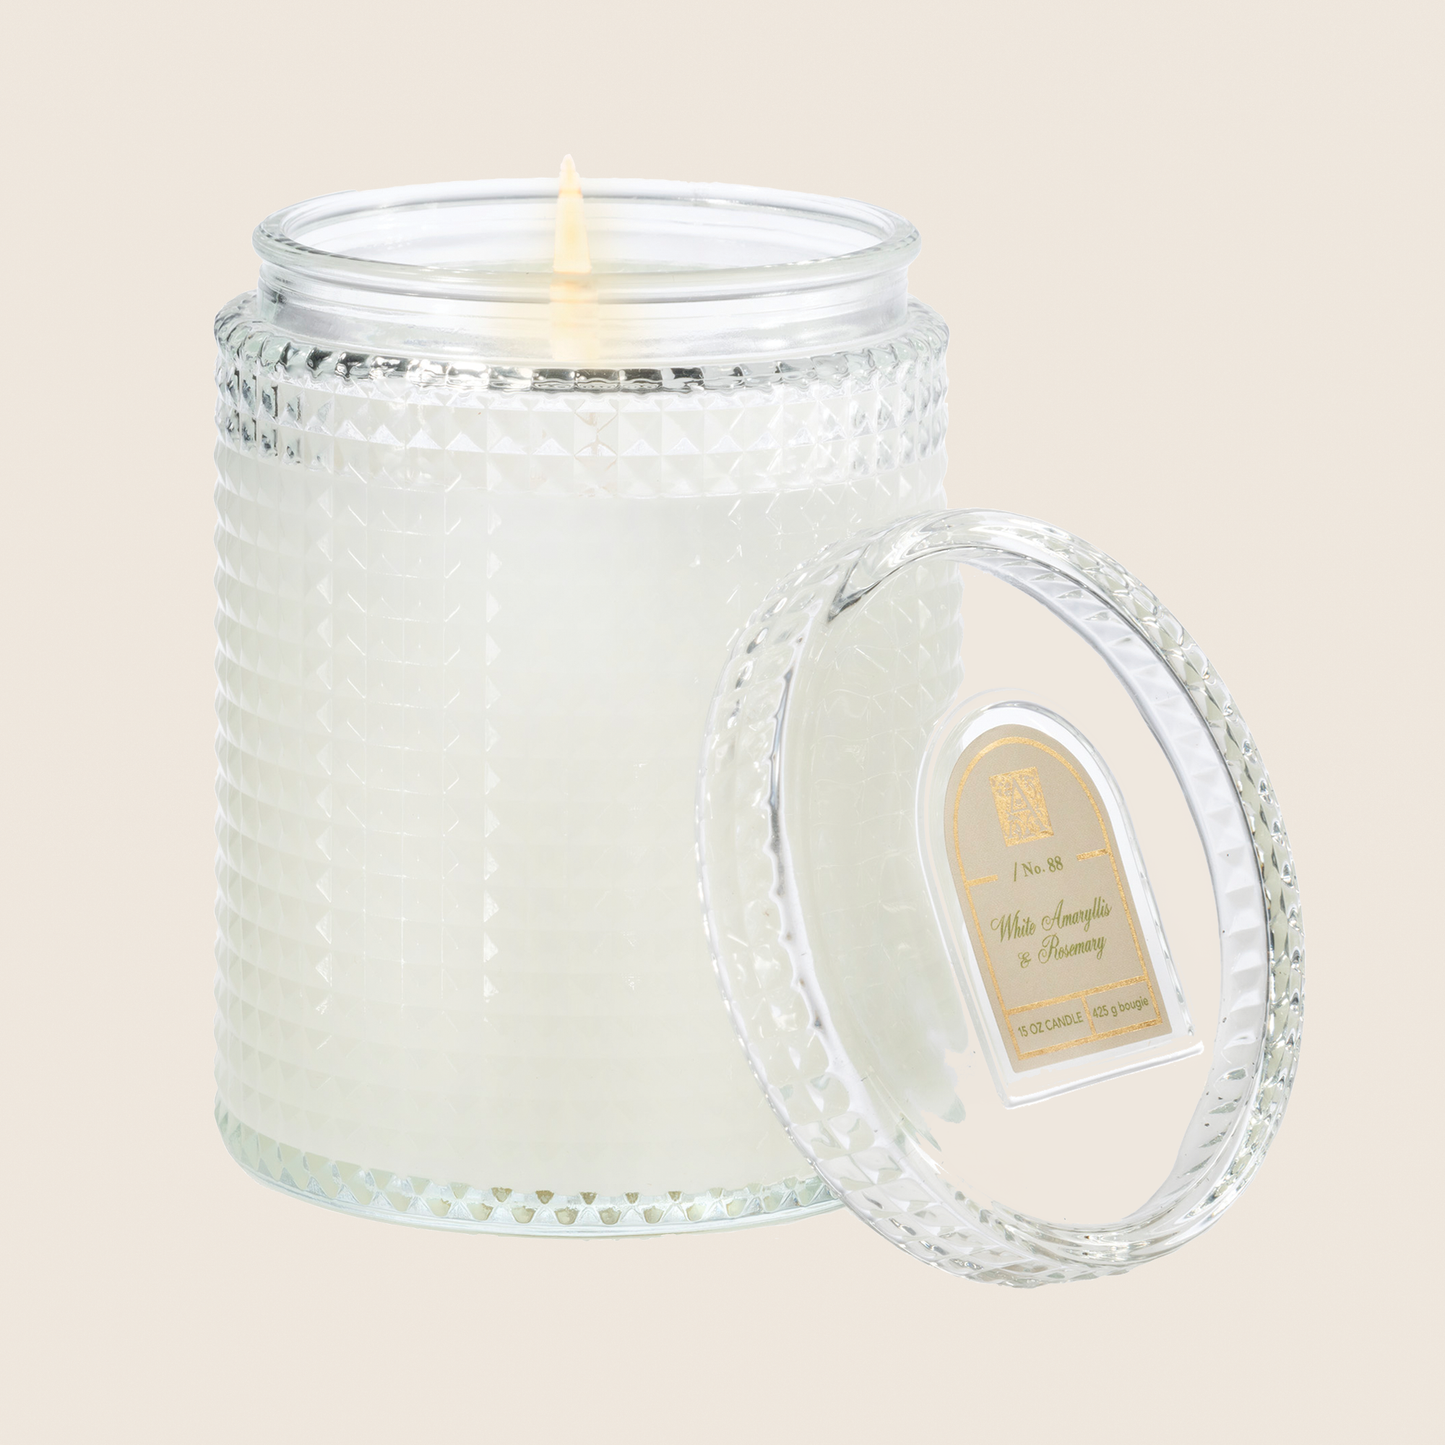 NEW! White Amaryllis - Textured Glass Candle with Lid